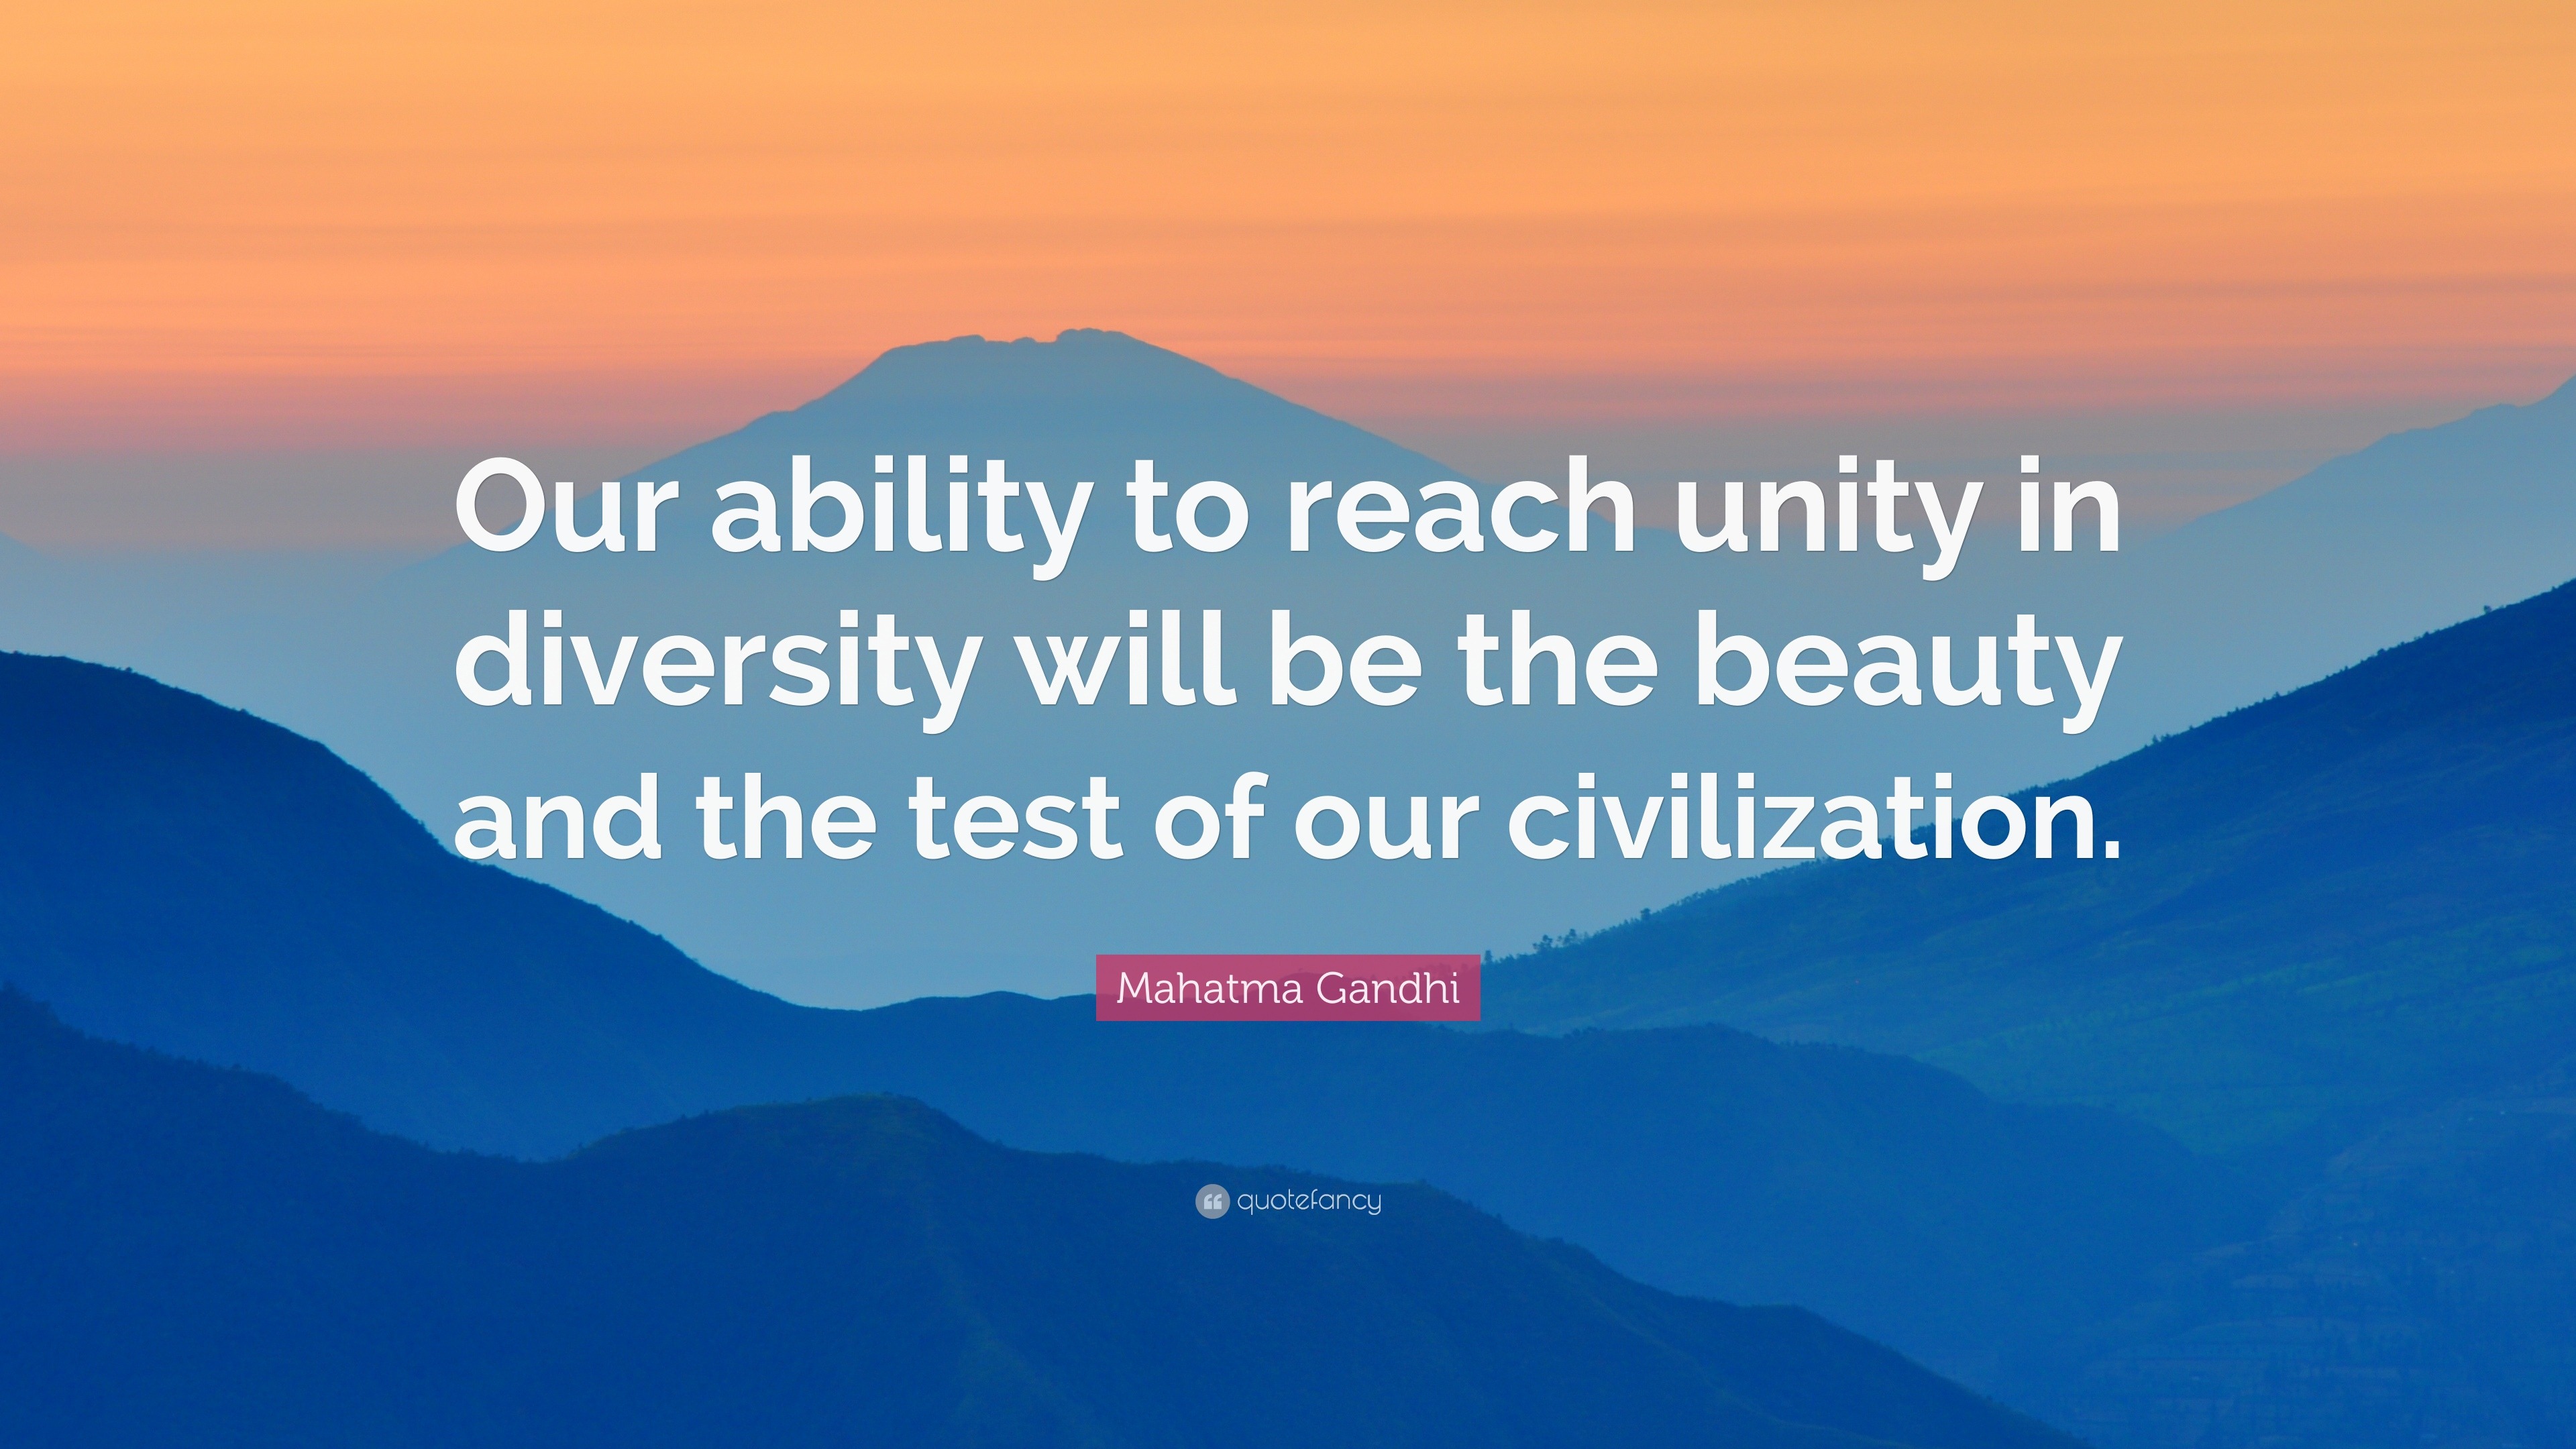 Mahatma Gandhi Quote: “Our ability to reach unity in diversity will be